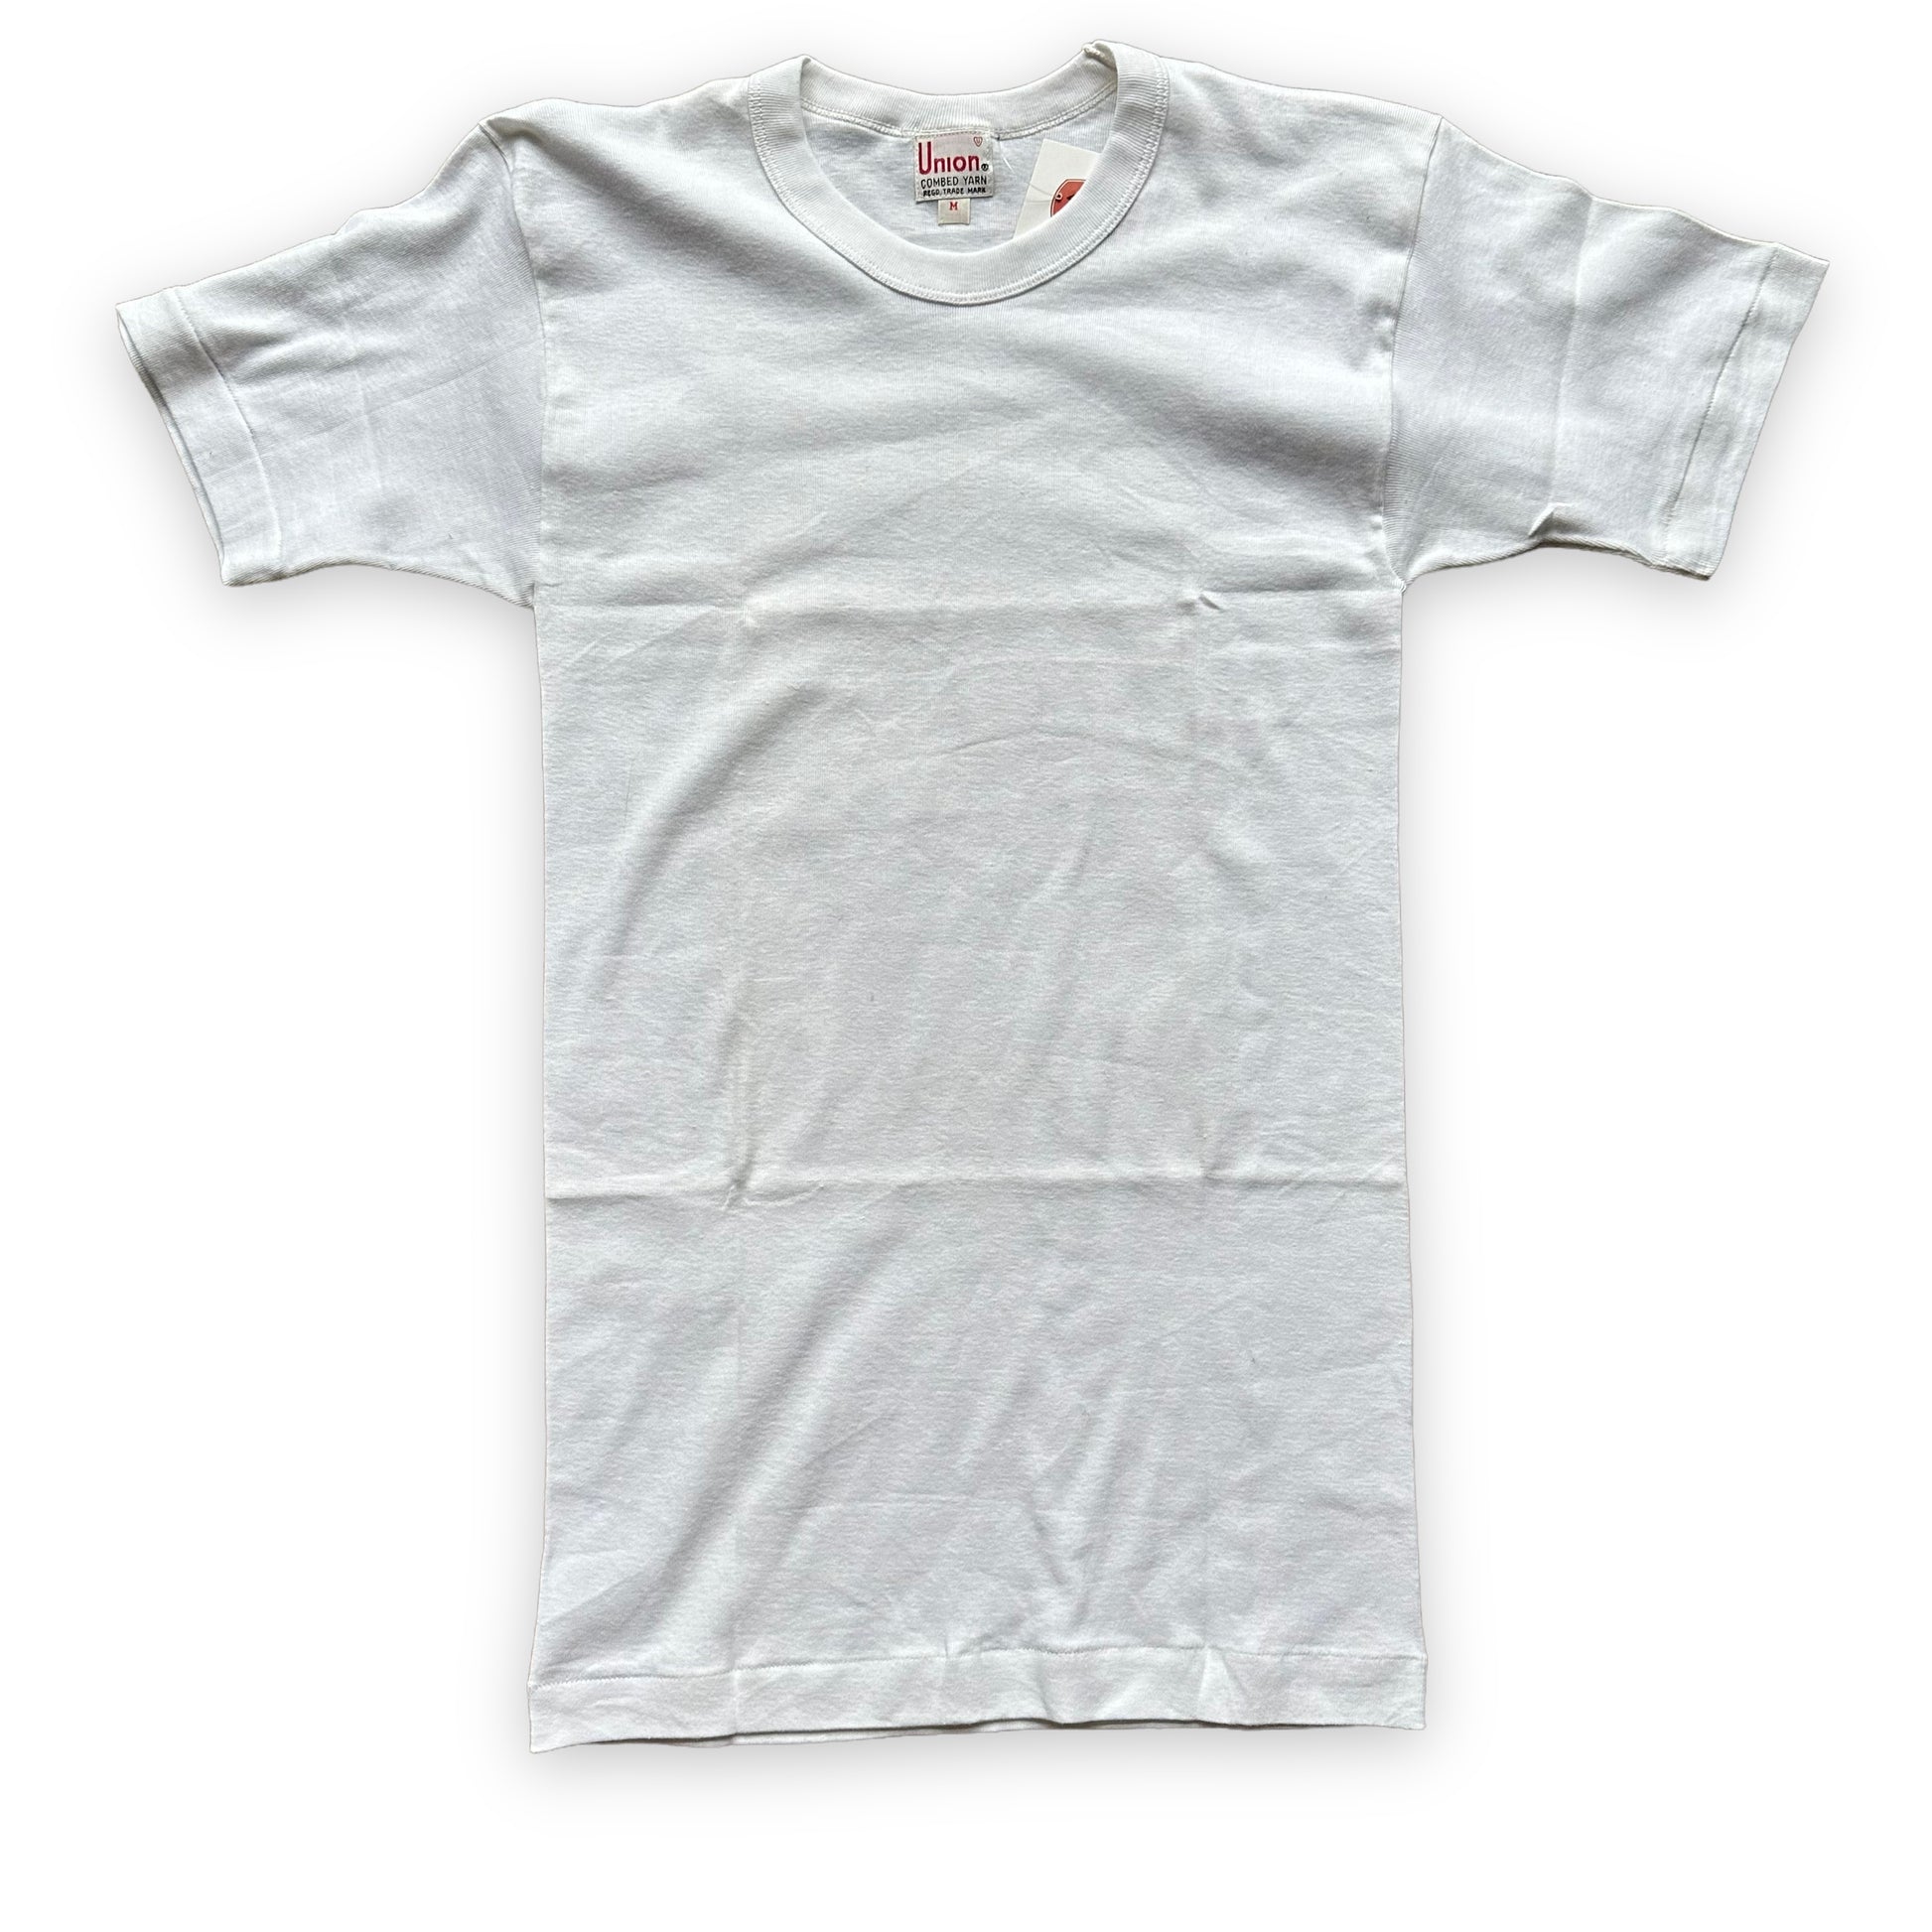 Front View of Vintage Union Combed Yarn Blank Tee Shirt SZ M | Vintage Blank Tees Seattle | Vintage T-Shirts Seattle